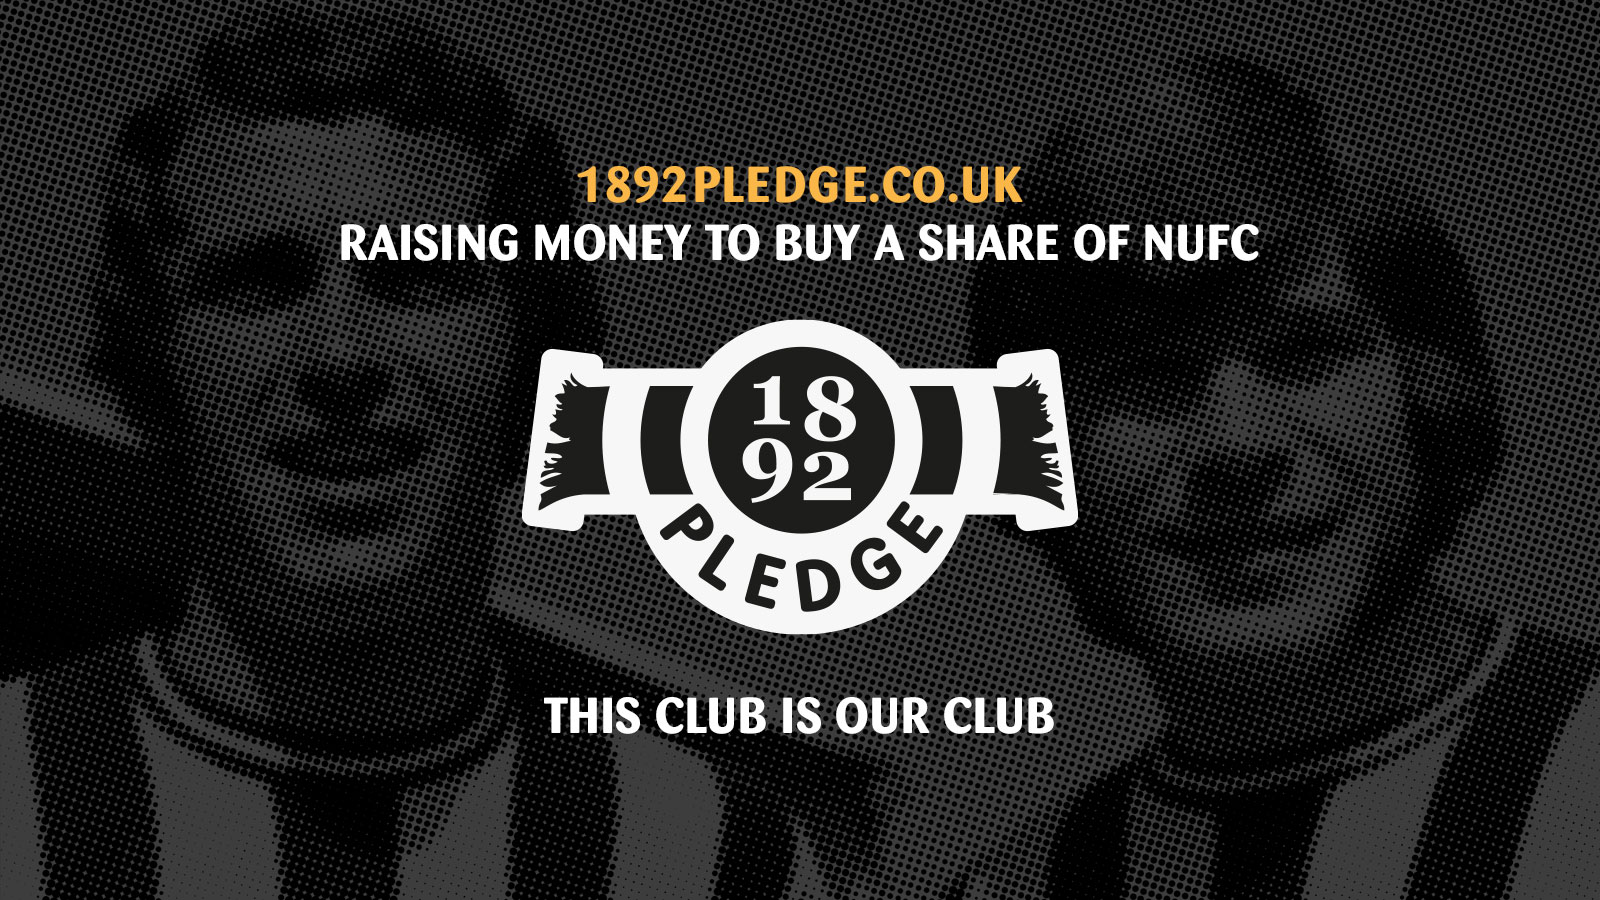 Pledge 1892 – in ourselves we trust!